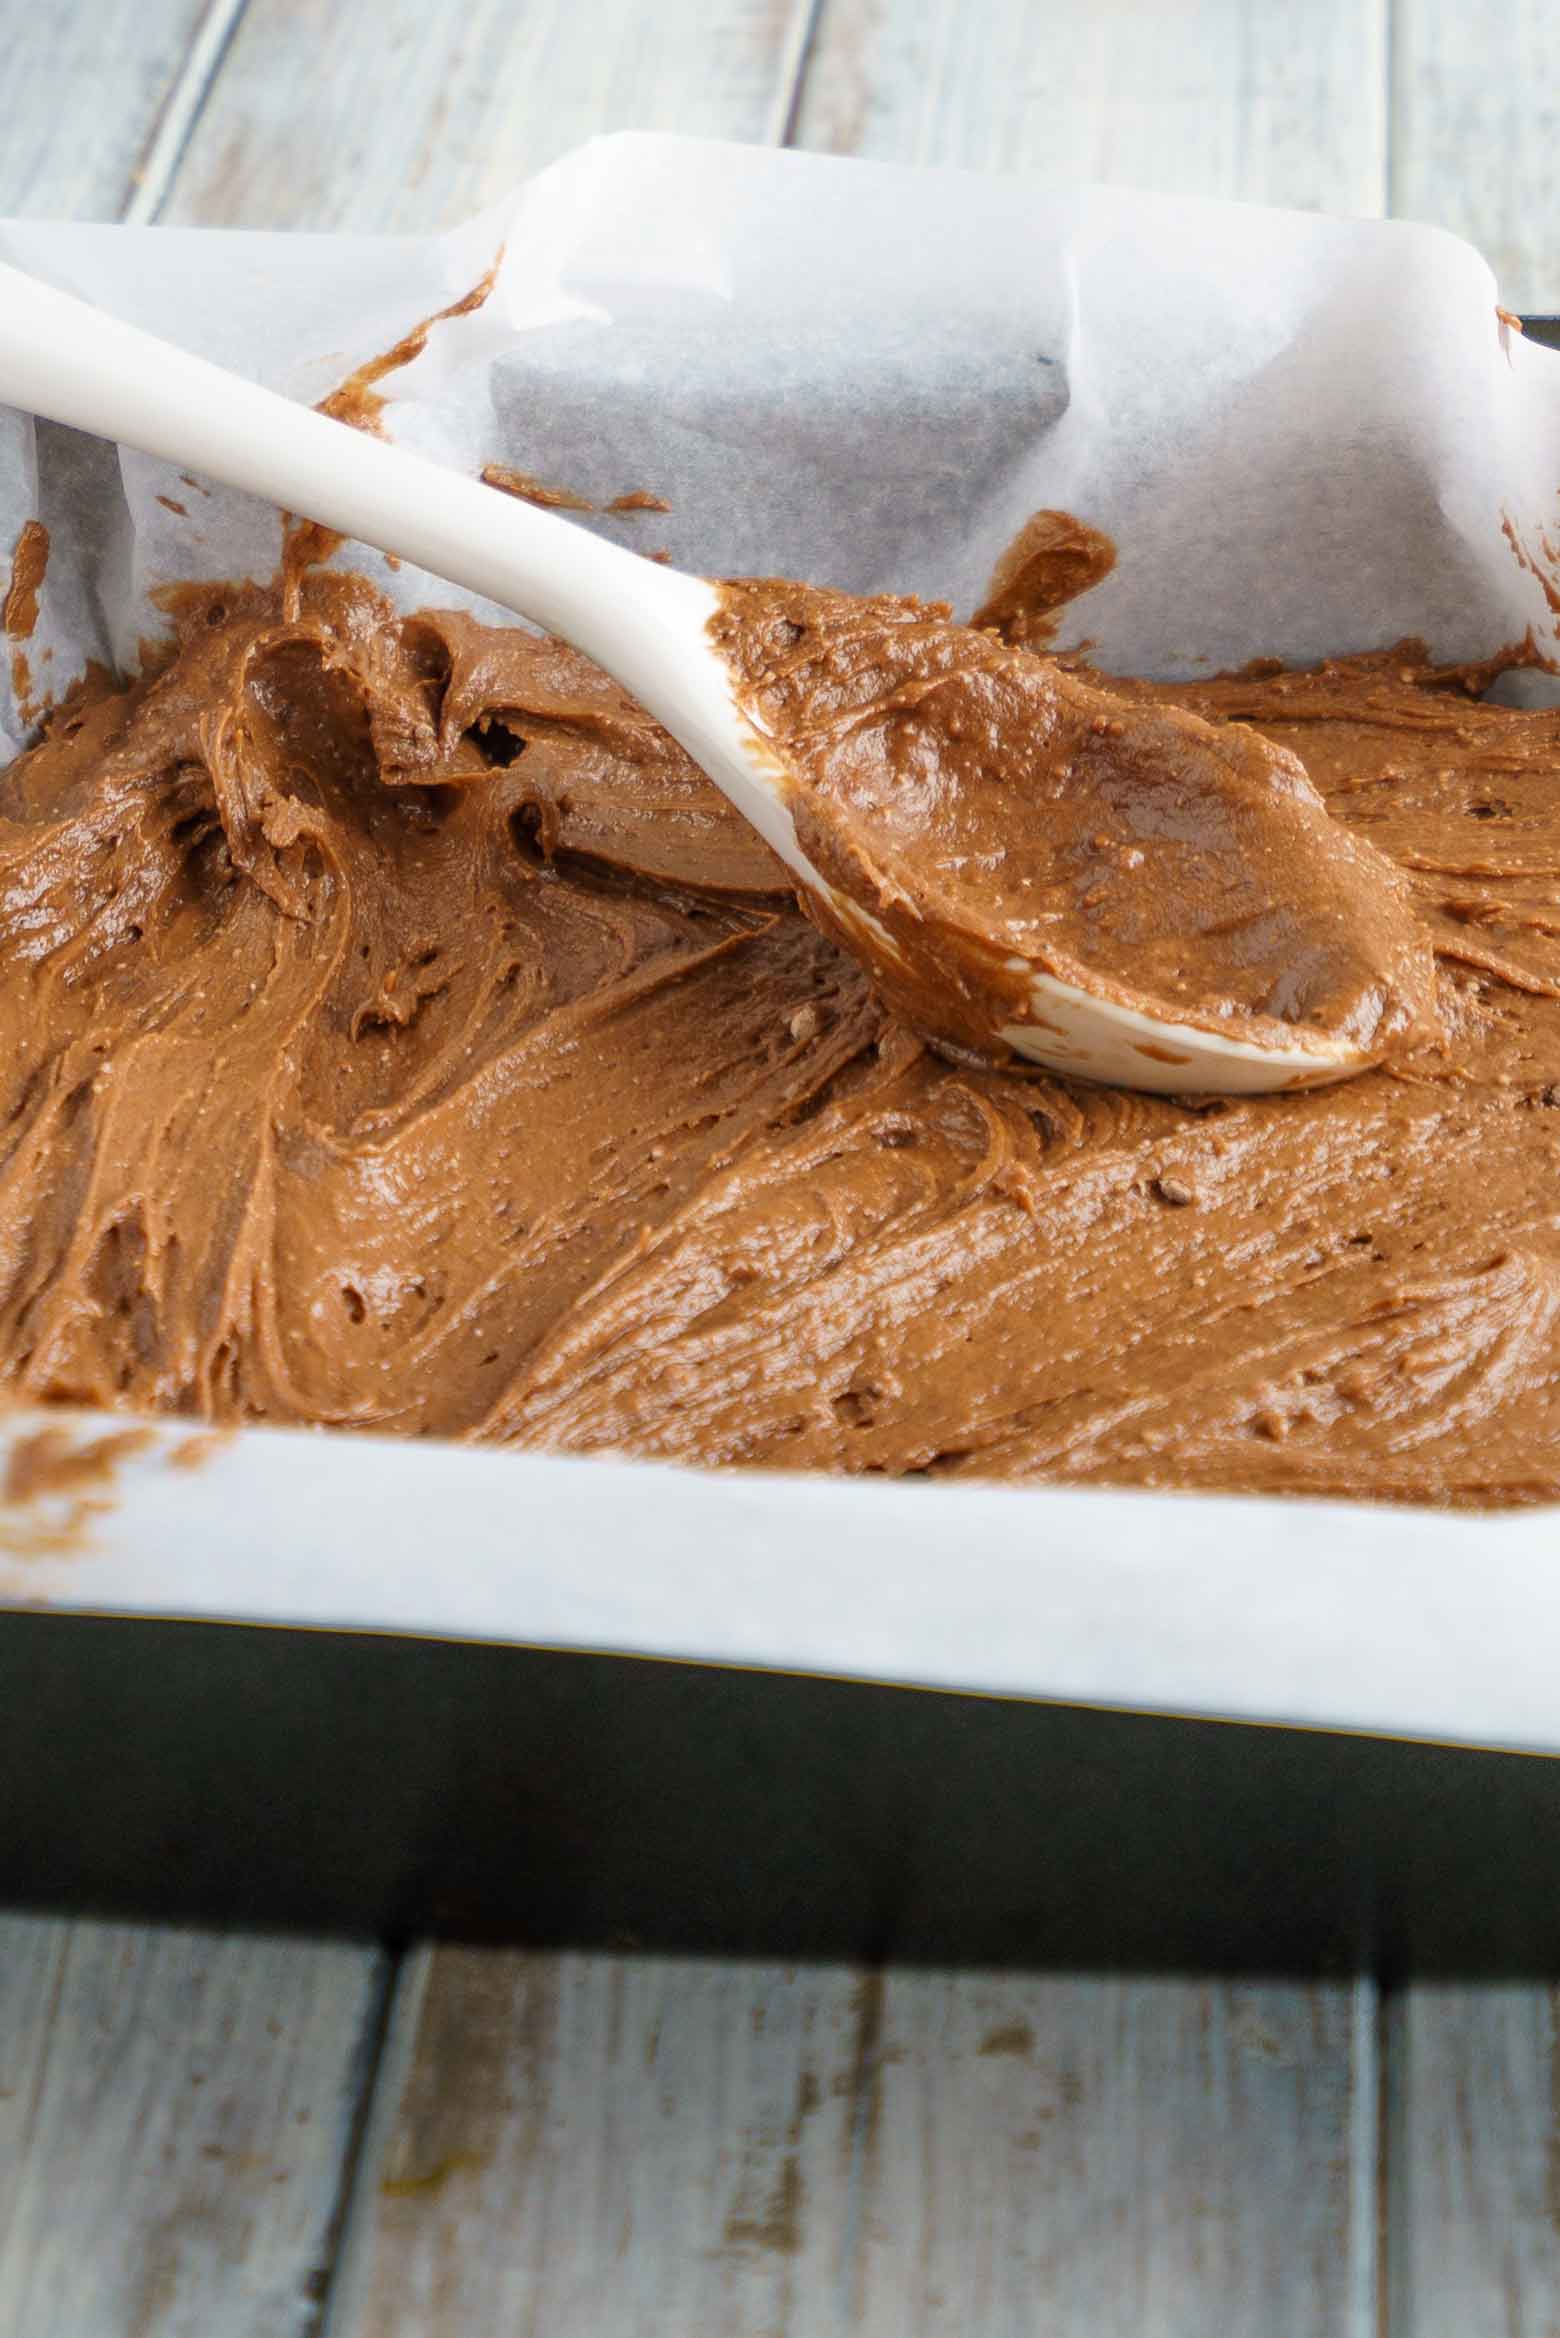 Chocolate cake mix and butter combine to make a crust